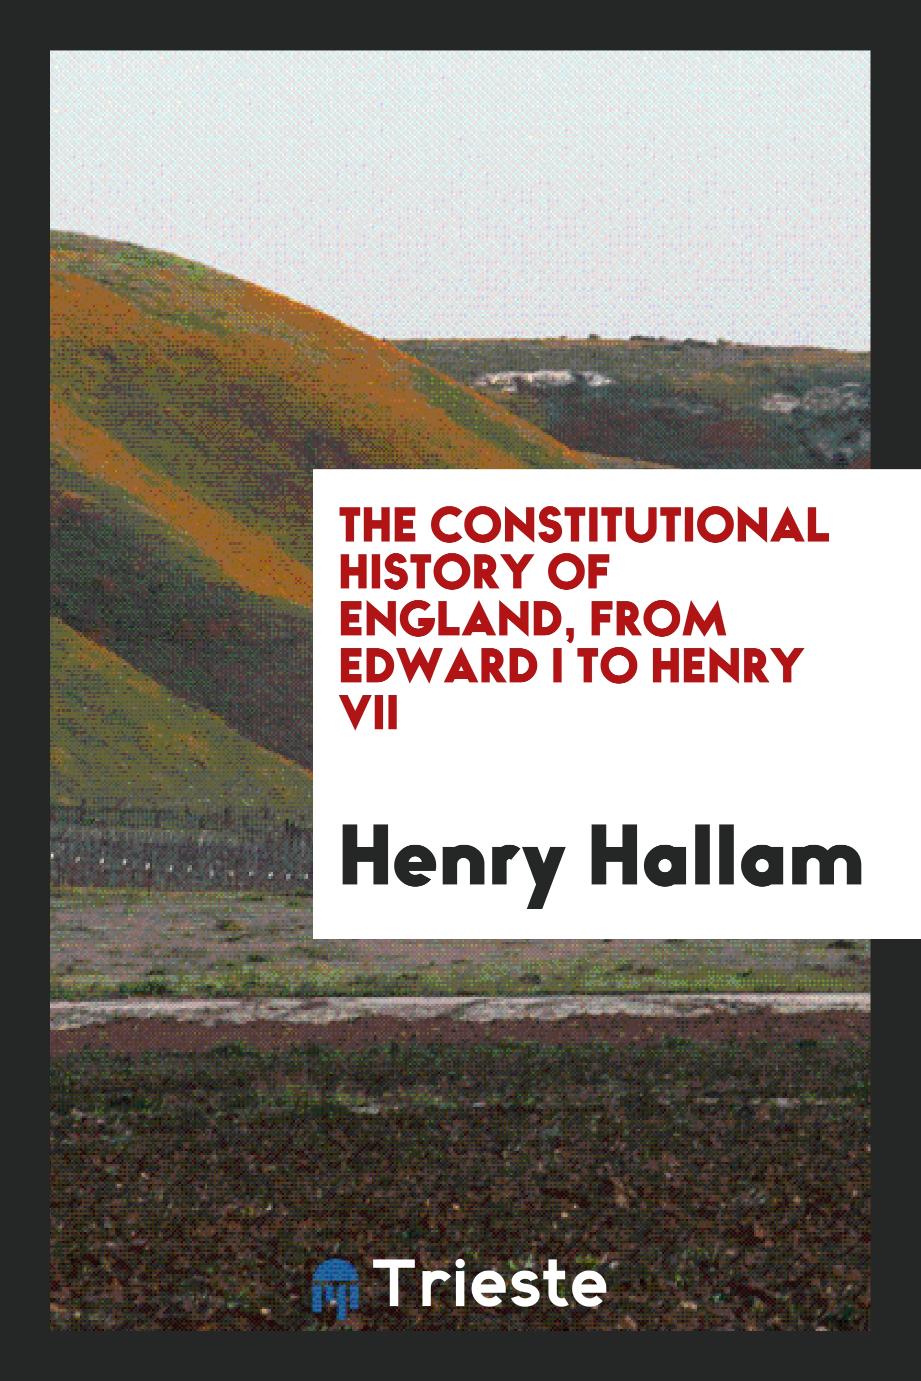 The Constitutional History of England, from Edward I to Henry VII